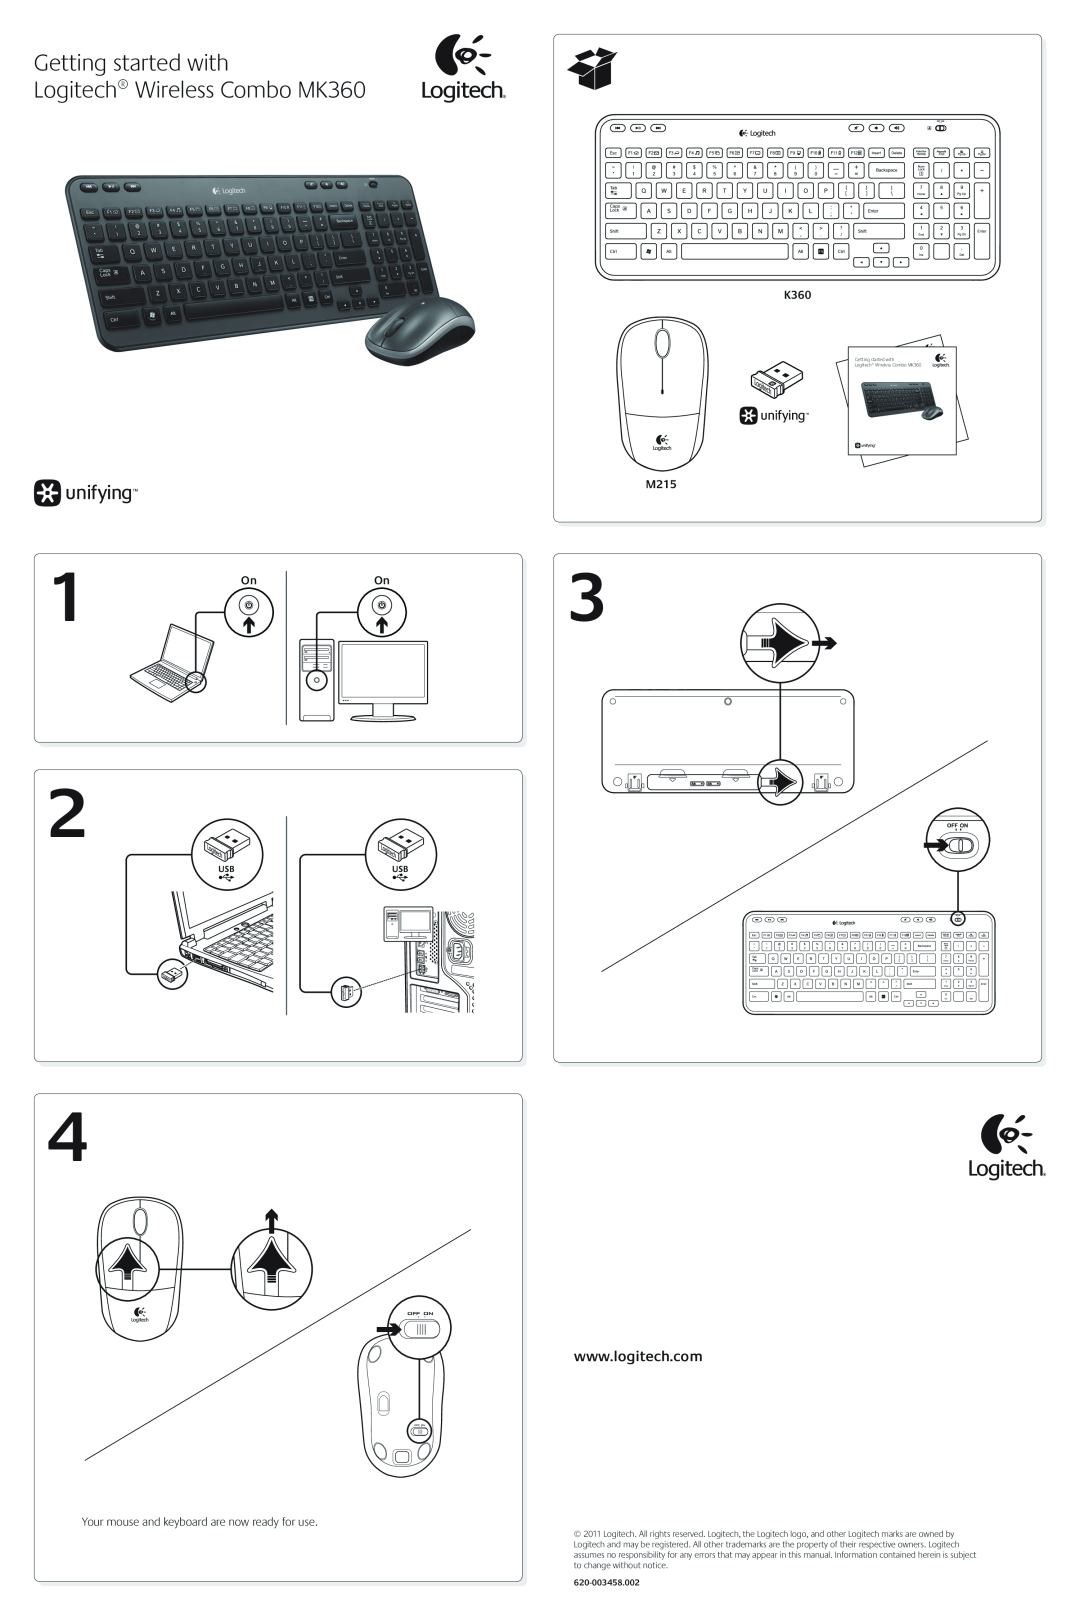 Logitech manual Getting started with Logitech Wireless Combo MK360, M215, OnOn, 620-003458.002 